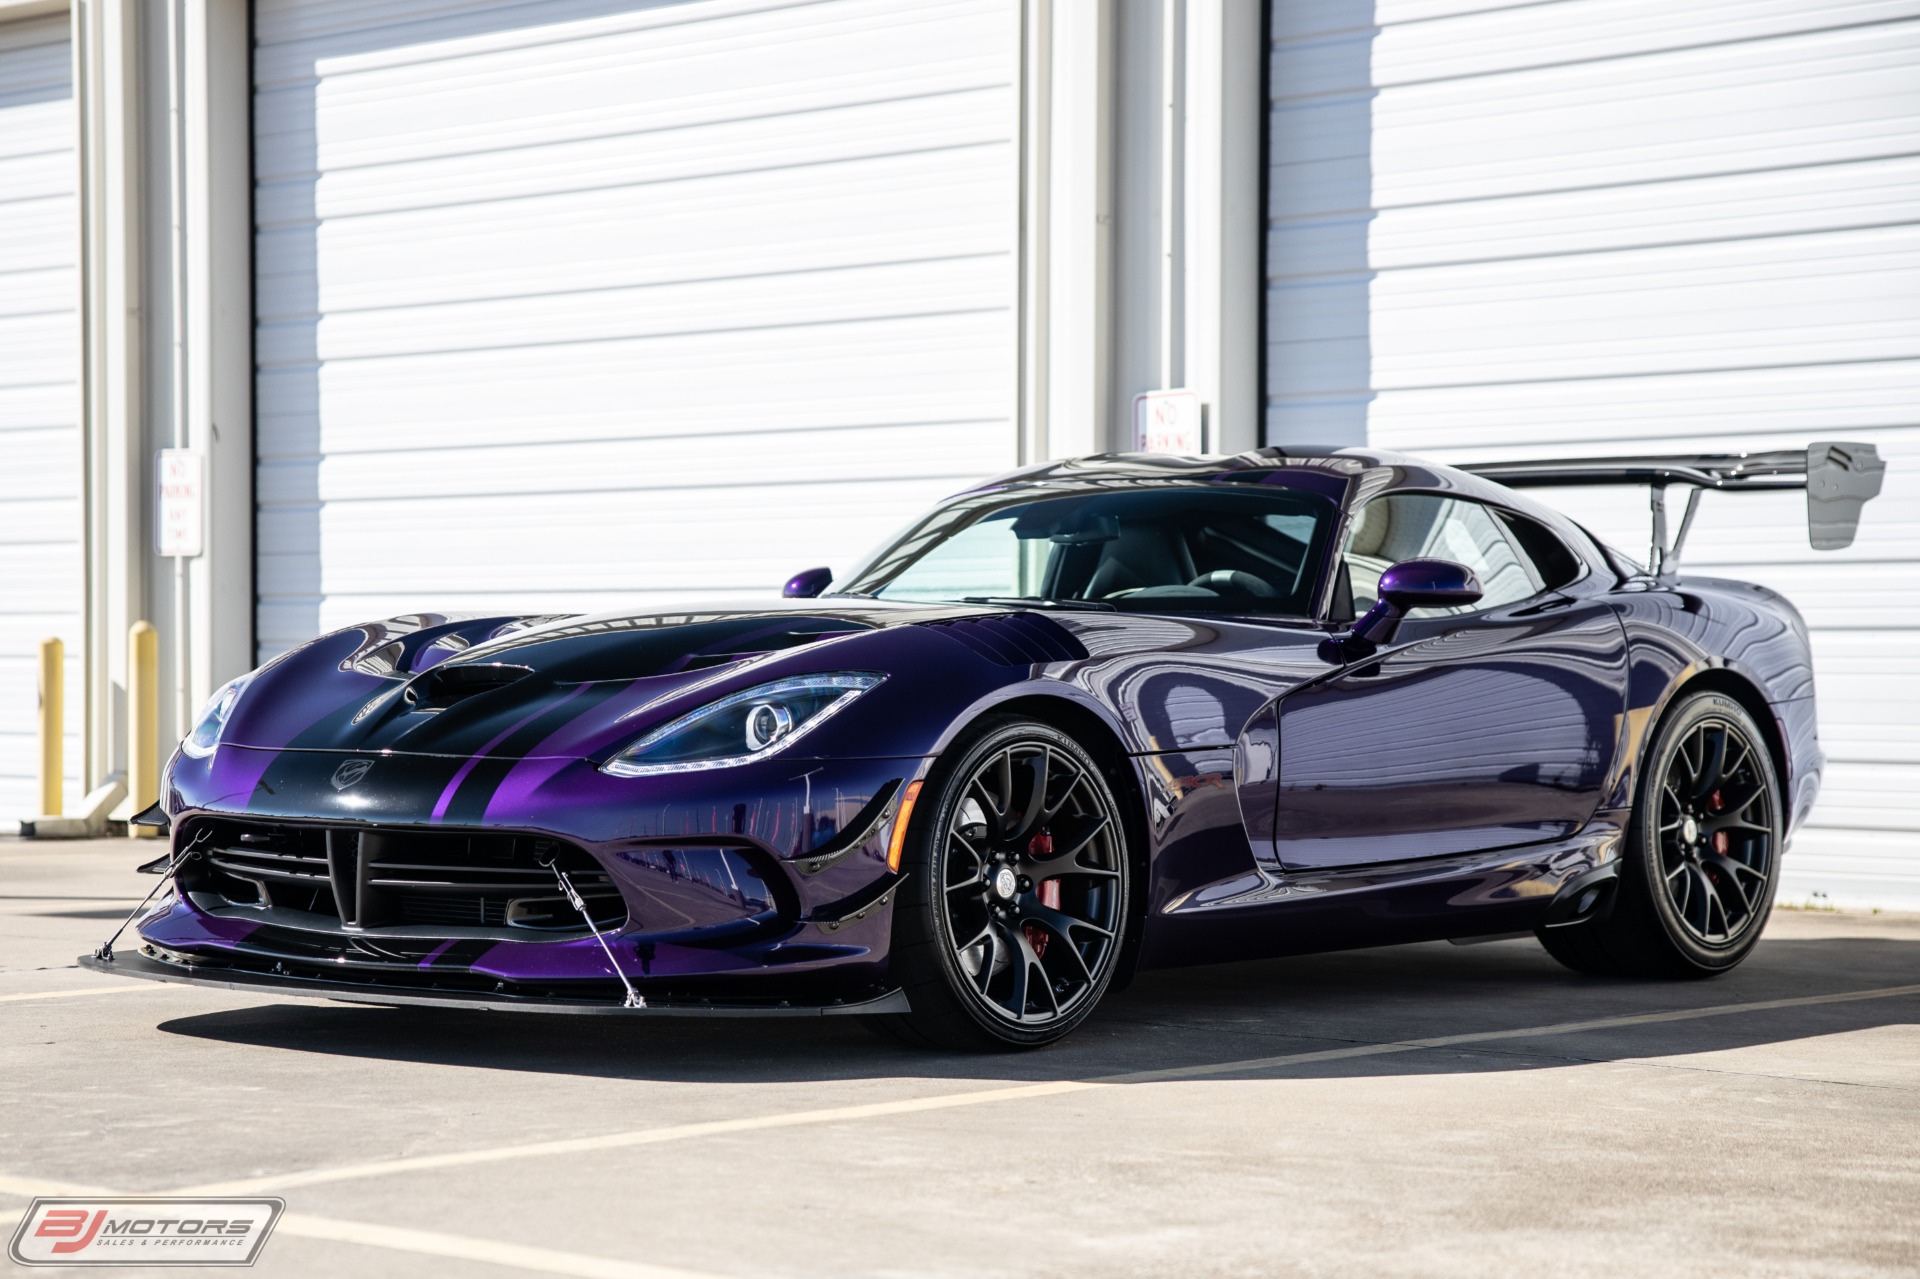 Used 2016 Dodge Viper Acr Extreme 1 Of 1 For Sale Special Pricing